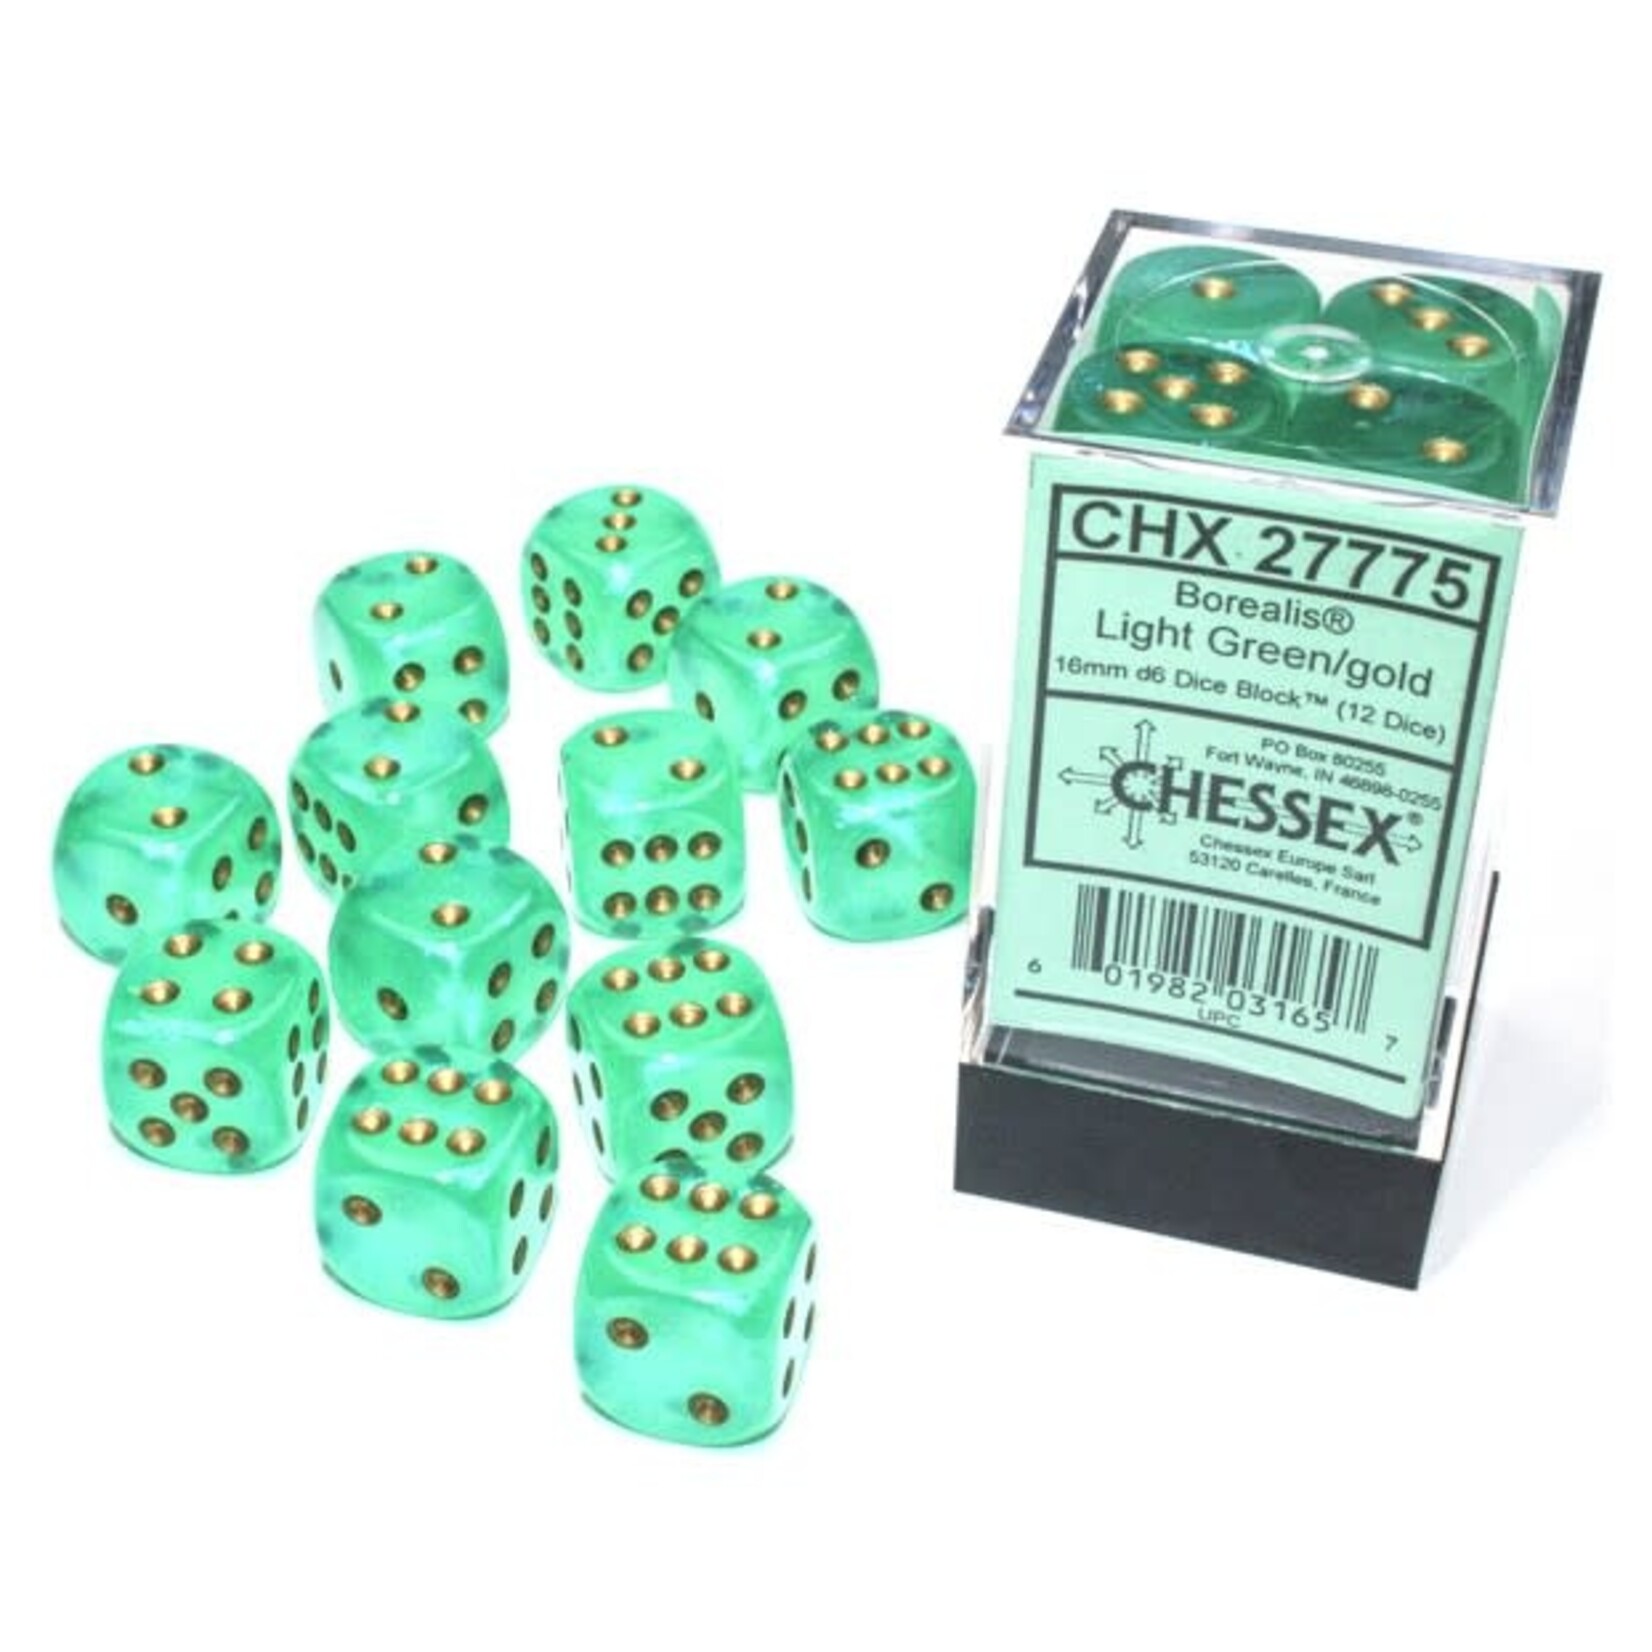 Chessex Cube of 12 D6 Dice Borealis Light Green with gold pips